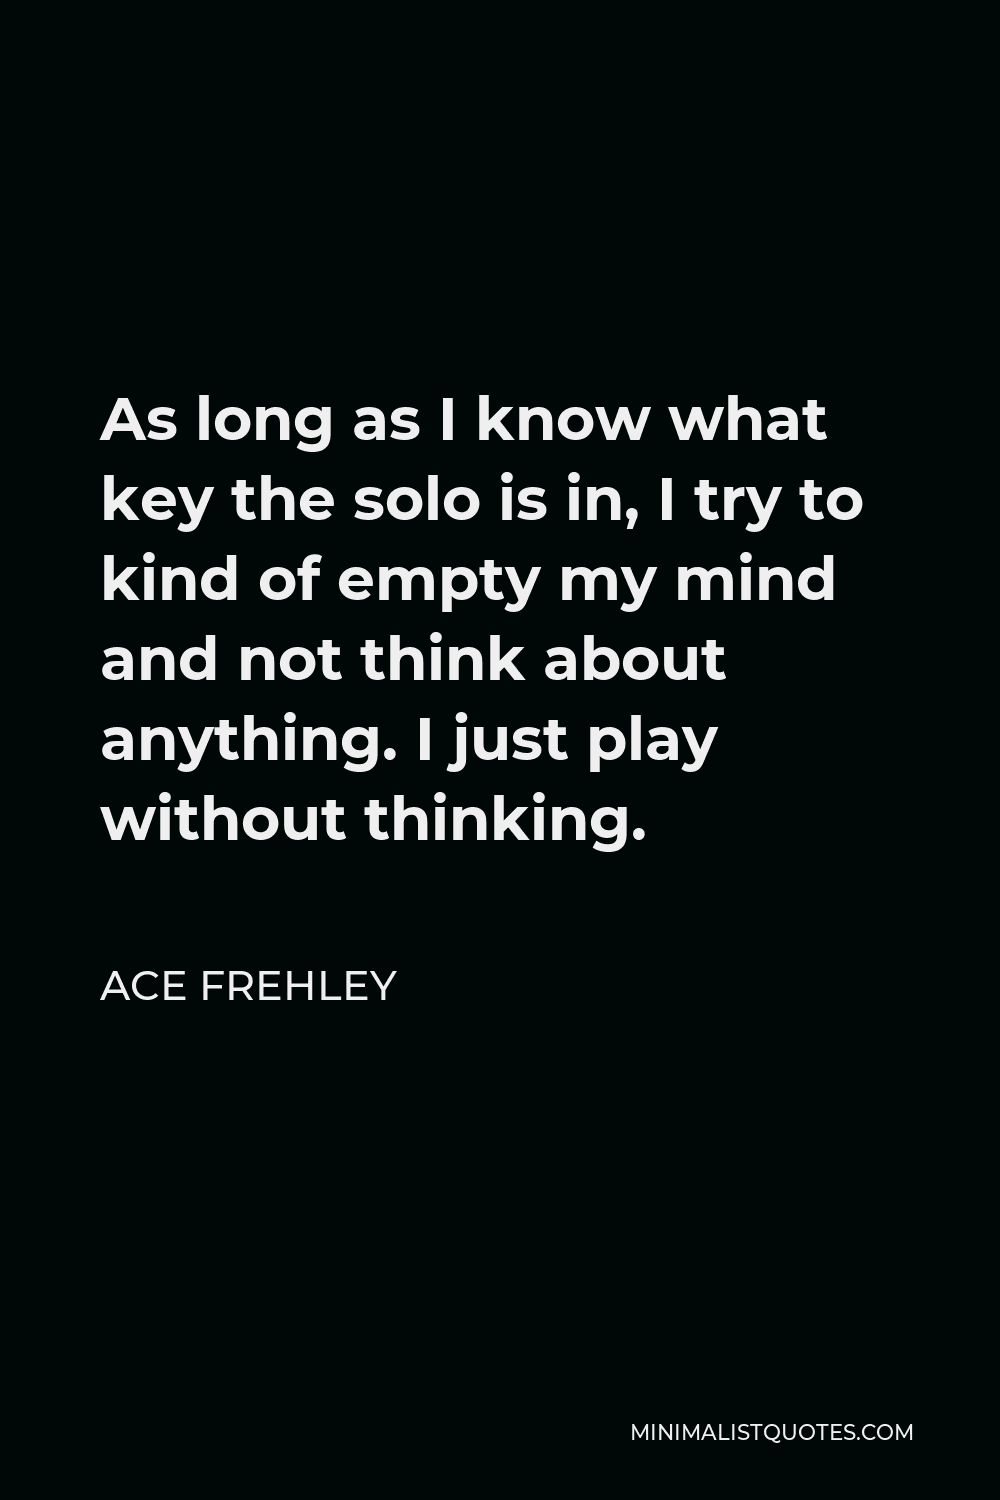 Ace Frehley Quote - As long as I know what key the solo is in, I try to kind of empty my mind and not think about anything. I just play without thinking.